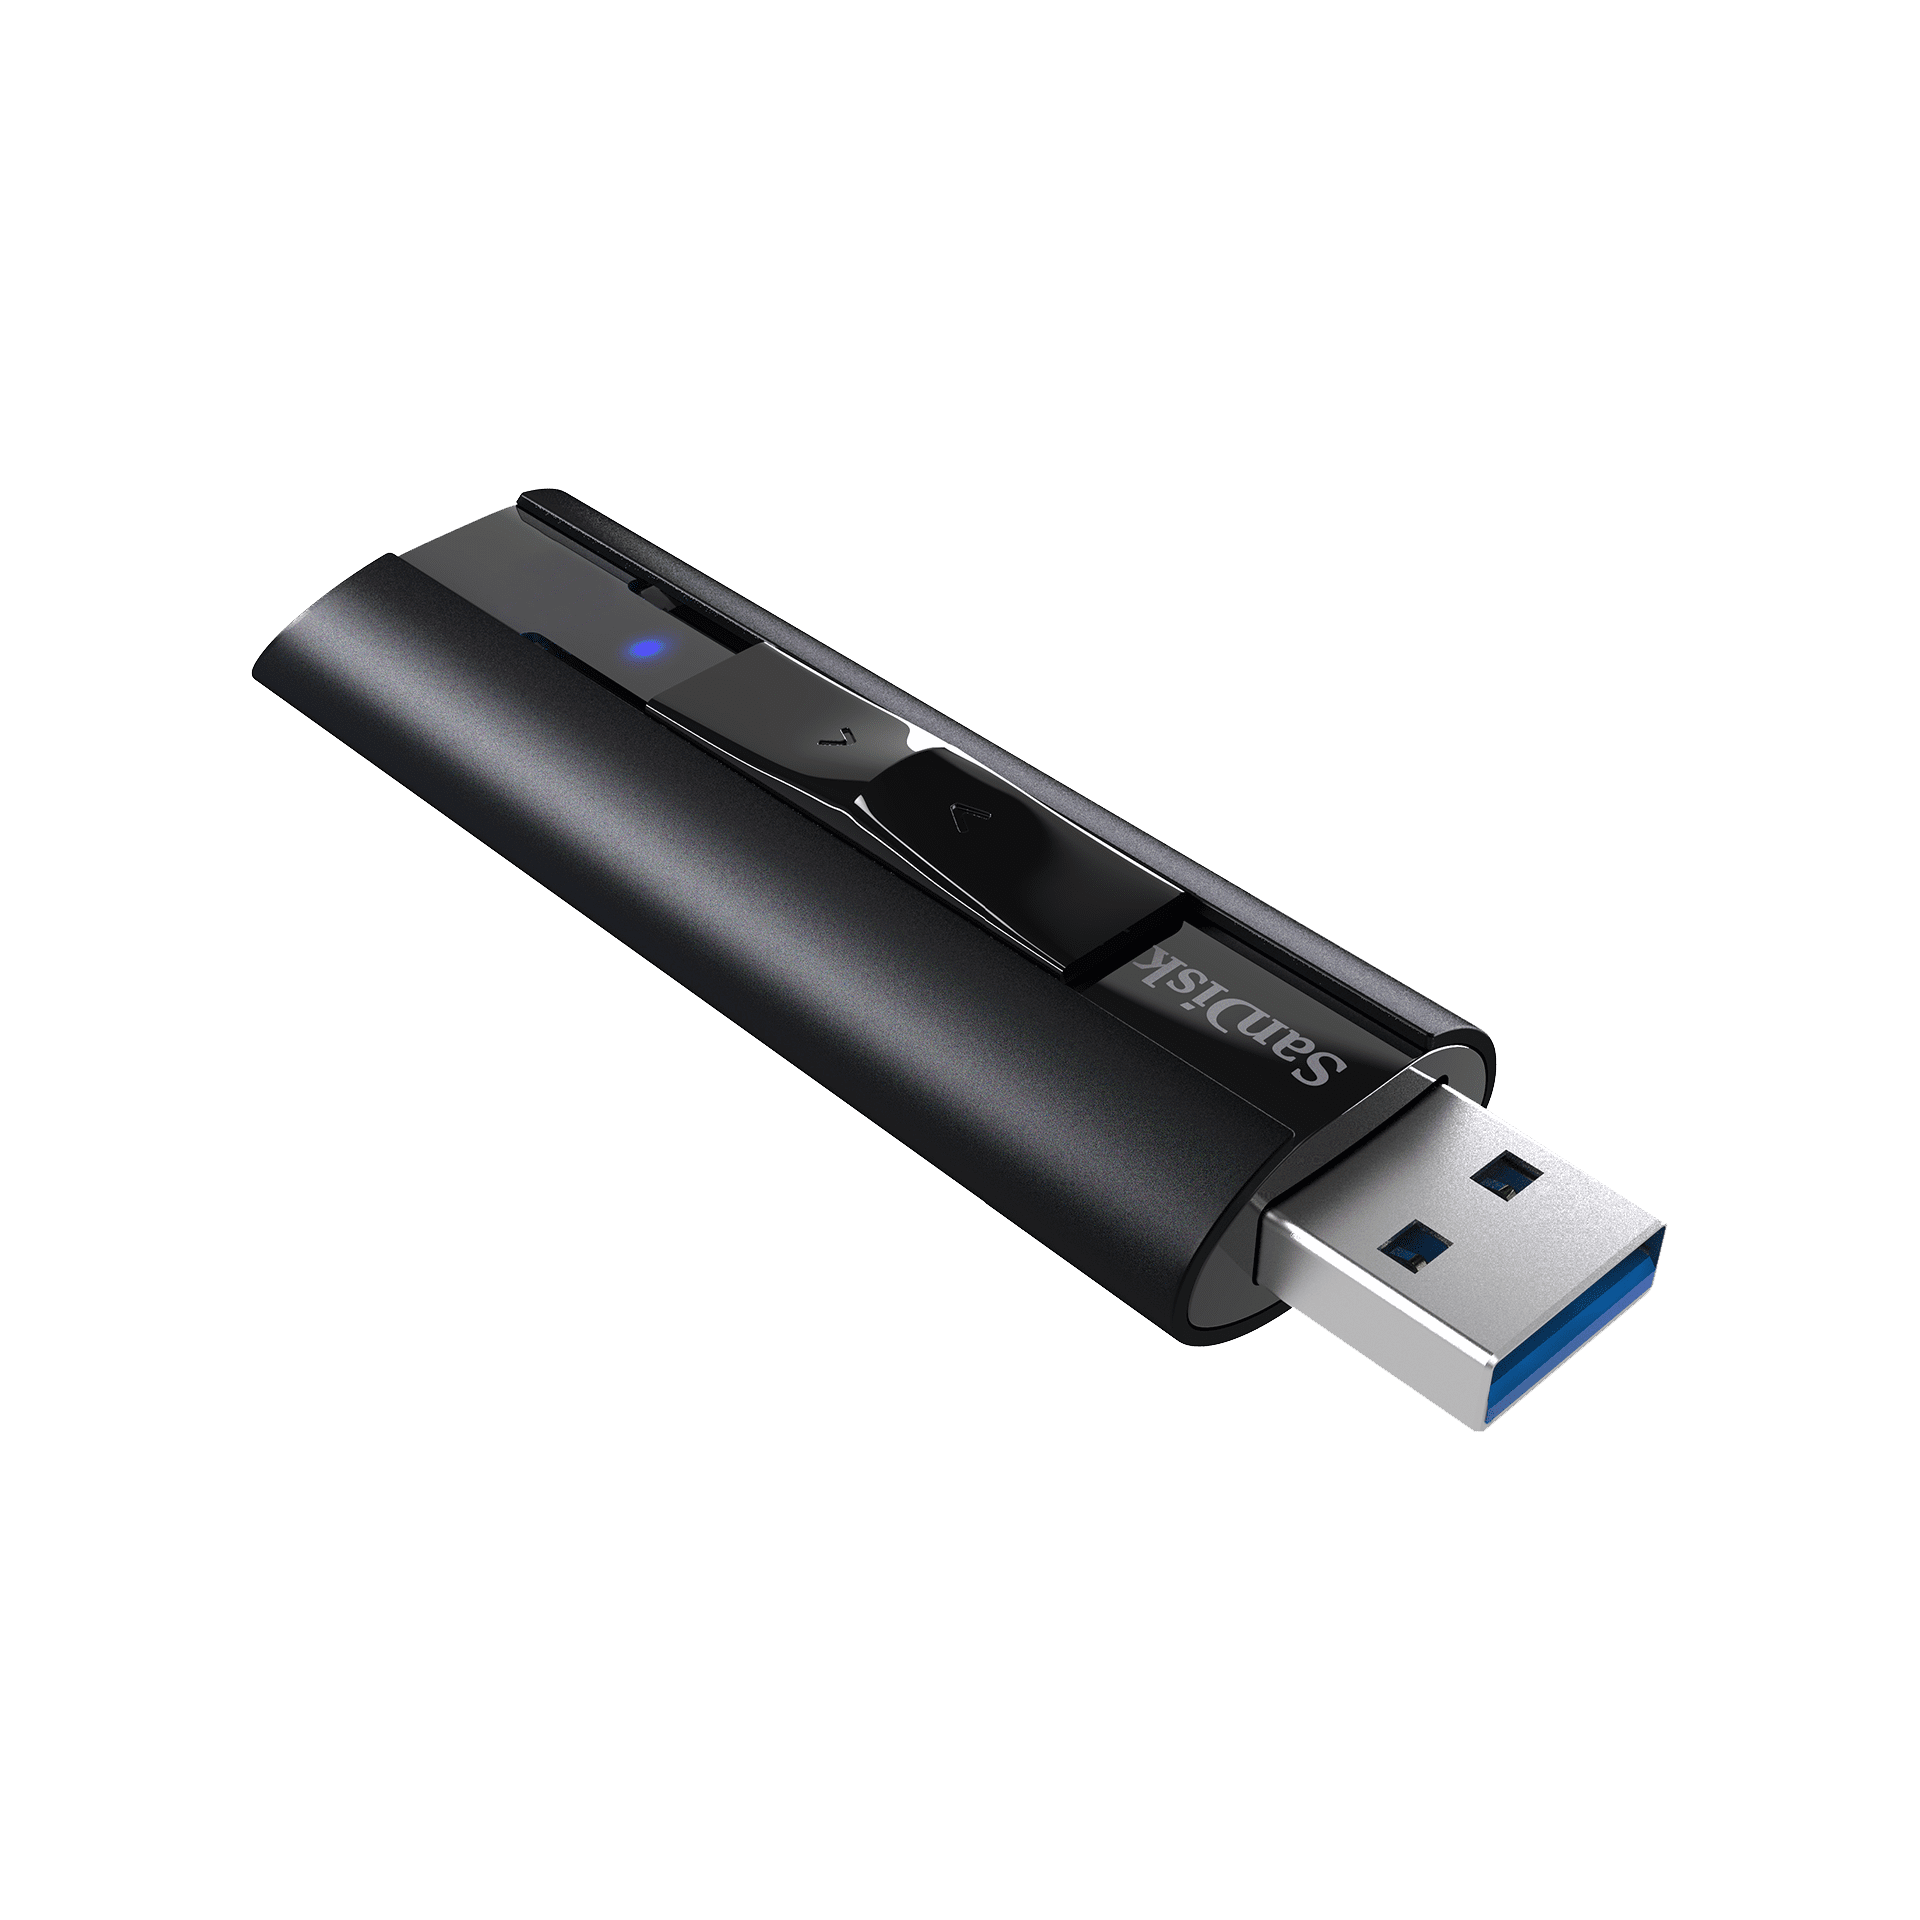 SanDisk 256GB Extreme PRO USB 3.2 Solid State Flash Drive